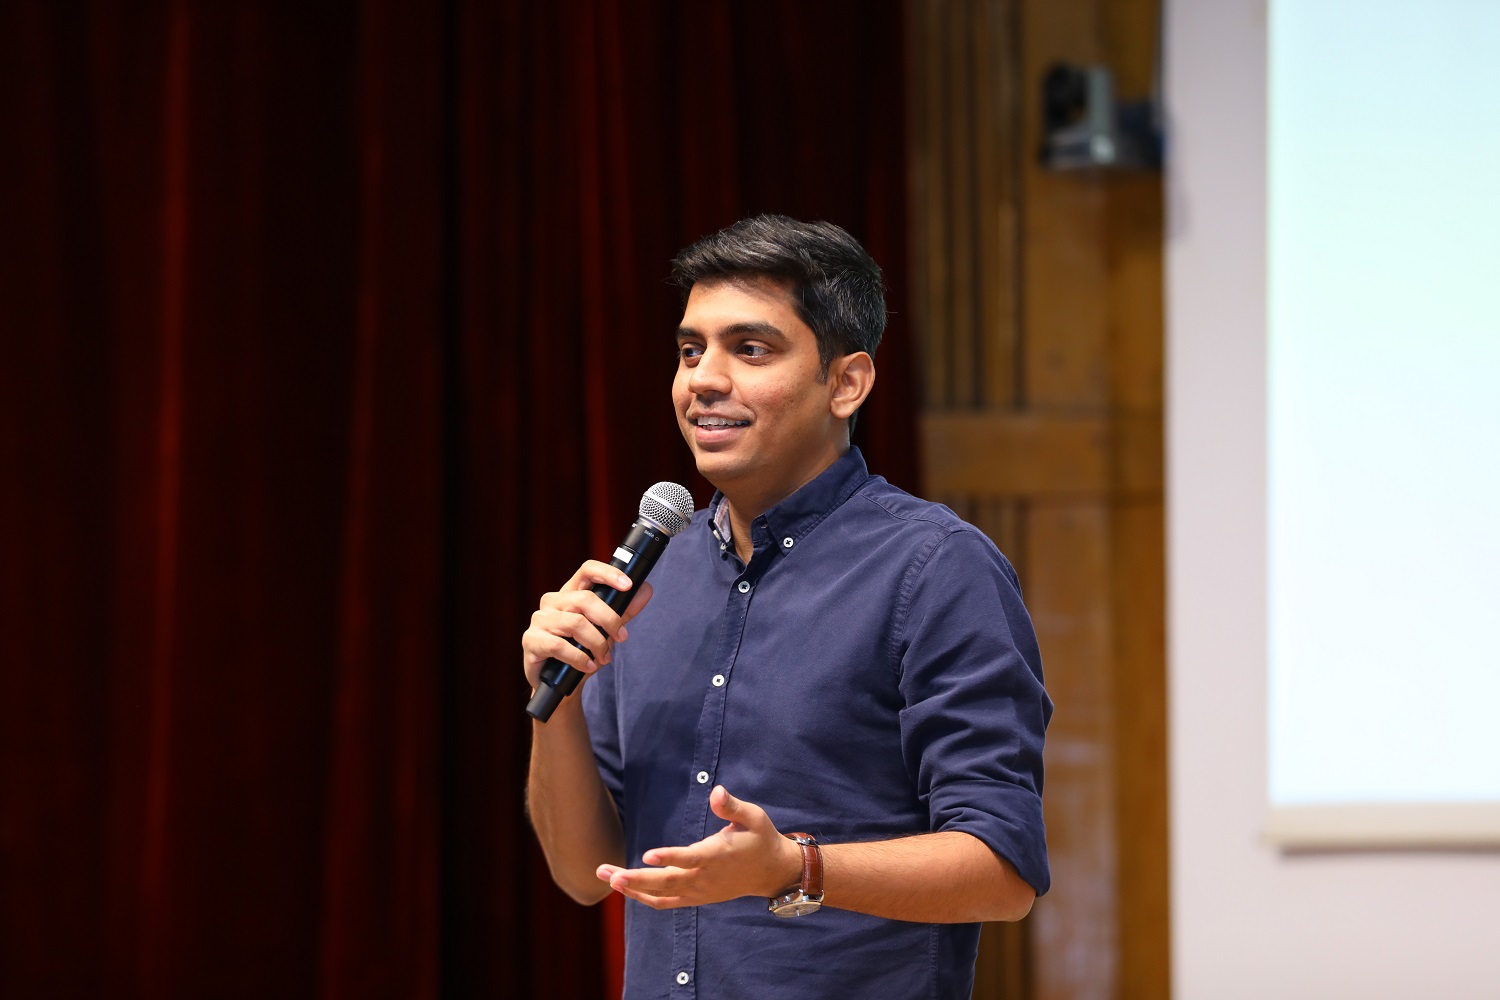 IIMB alumnus and stand-up comedy artiste Shridhar Venkataramana performed at IIMB on 29th October 2023, as part of the Alumni Events organised for the Institute’s Golden Jubilee Week celebrations